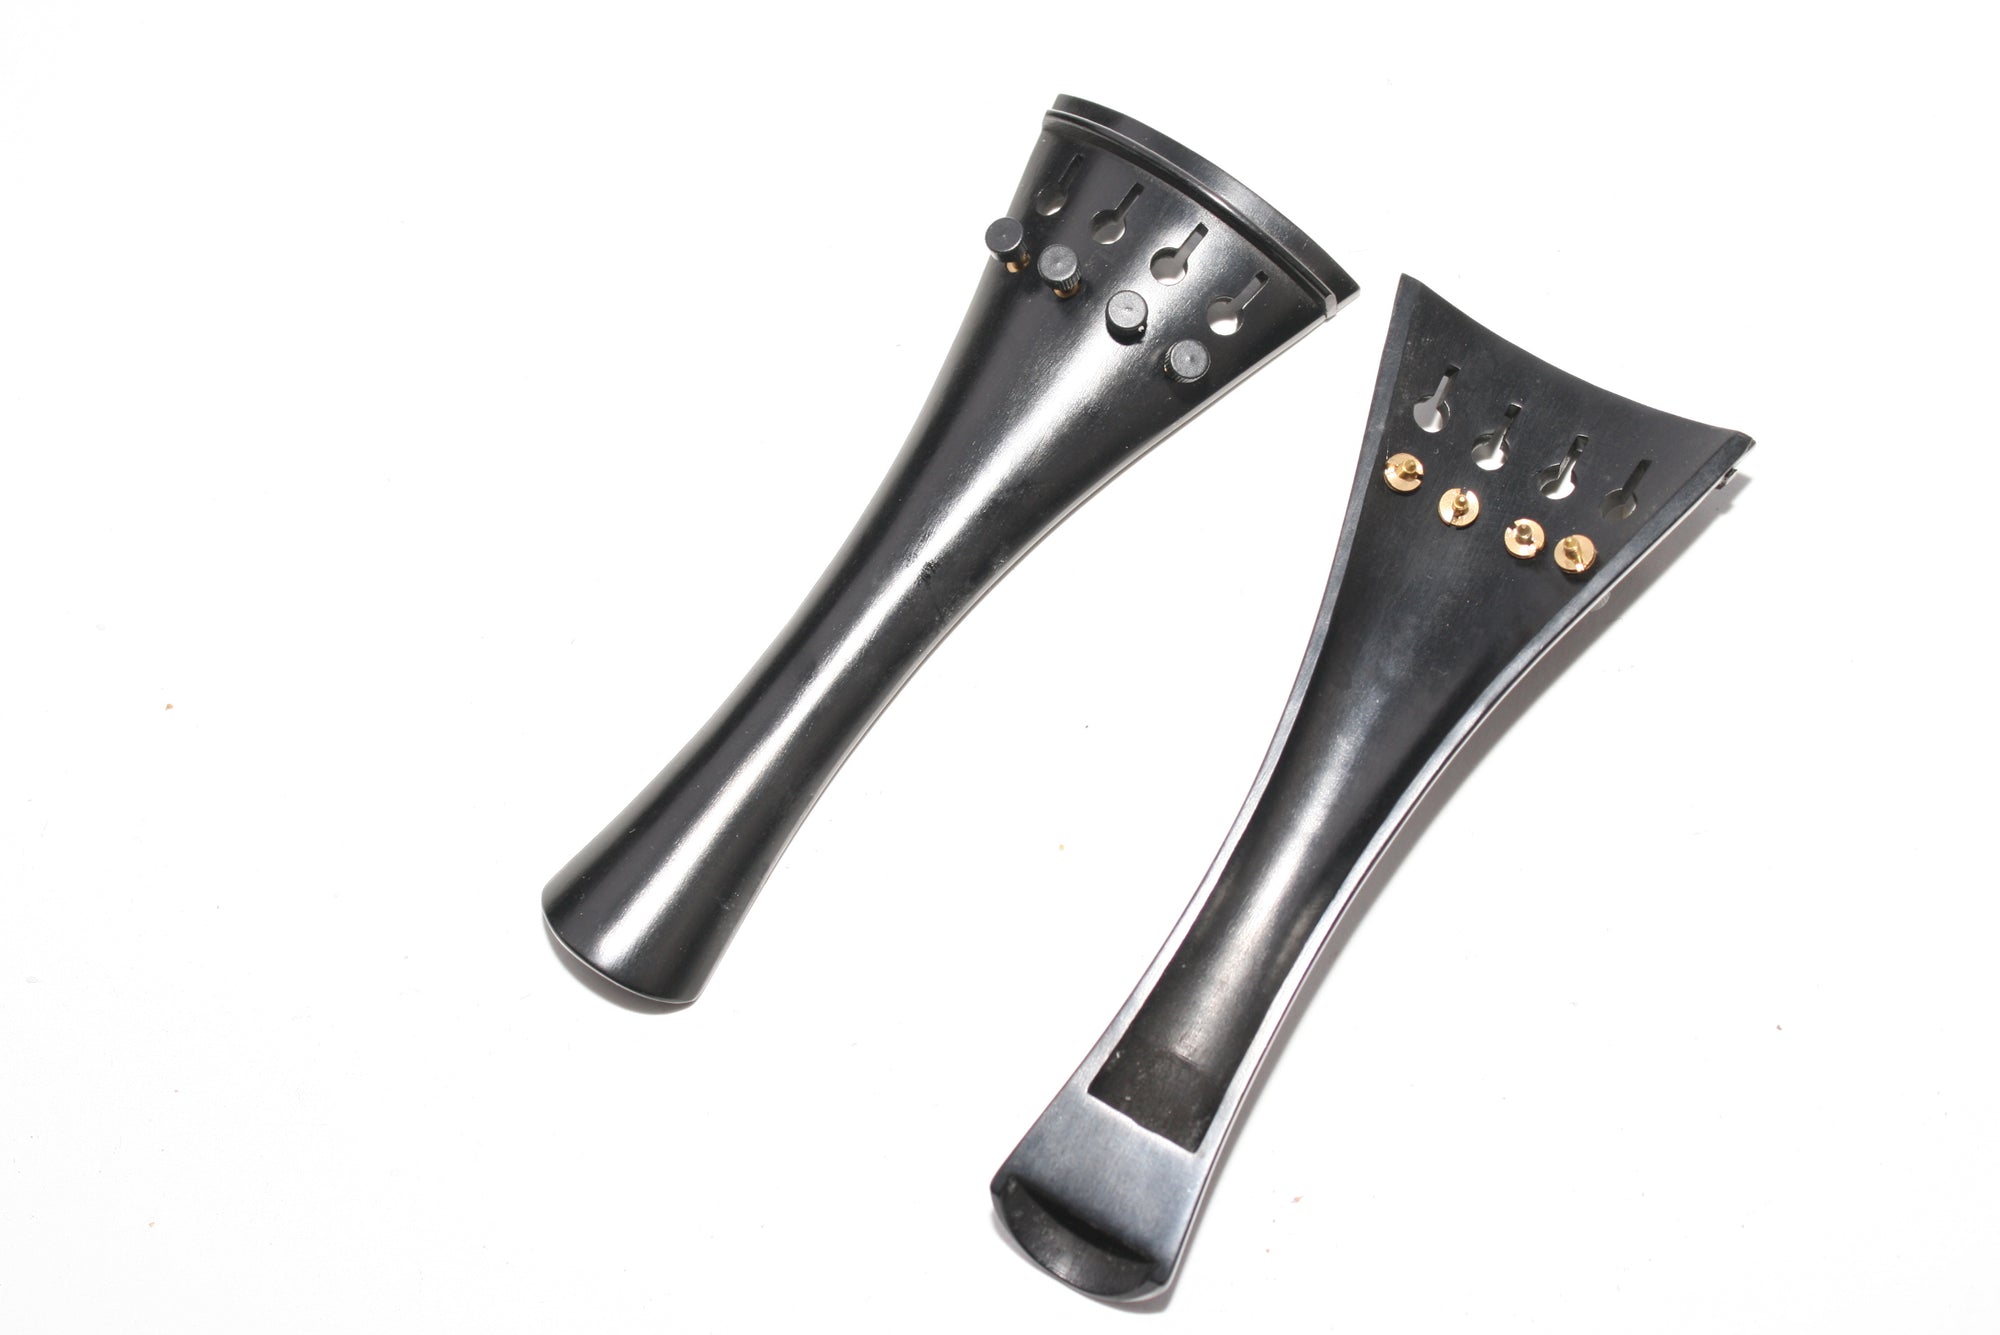 Viola tailpiece-French-"Schmidt tailpiece"-Ebony-4 tuners-hollow-135mm